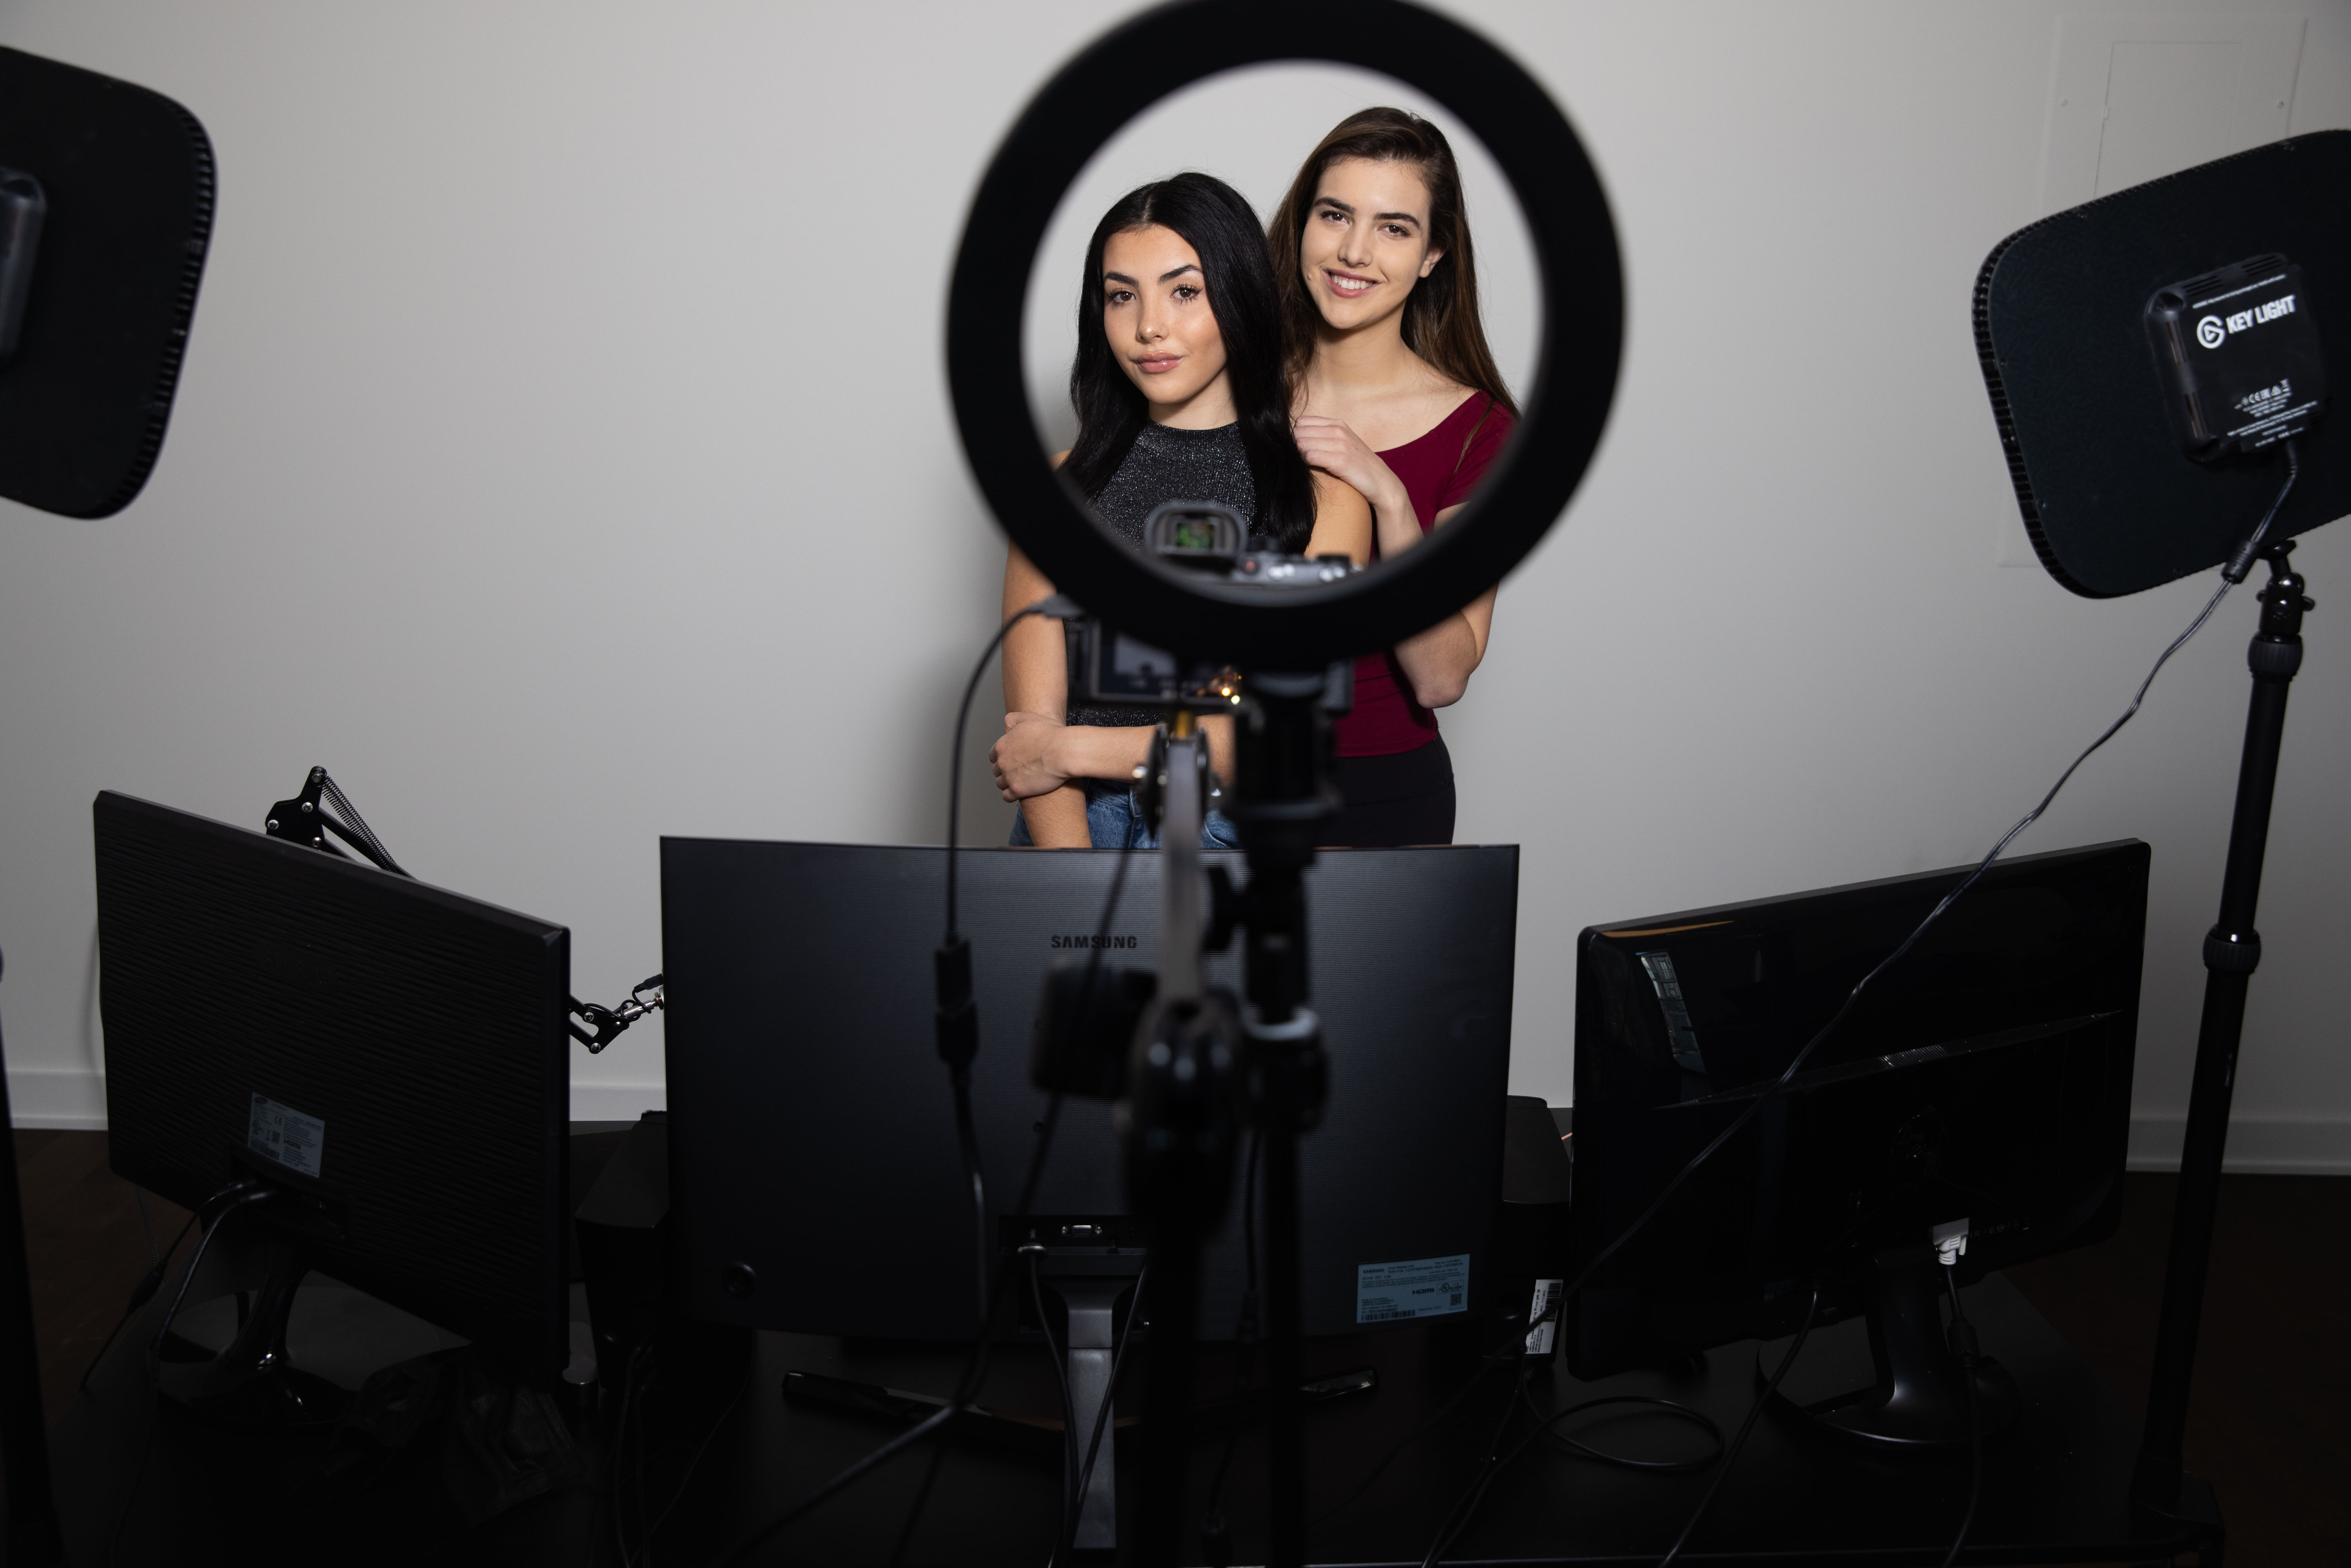 Envy Gaming Signs Chess-Playing Botez Sisters in Creator Network Launch